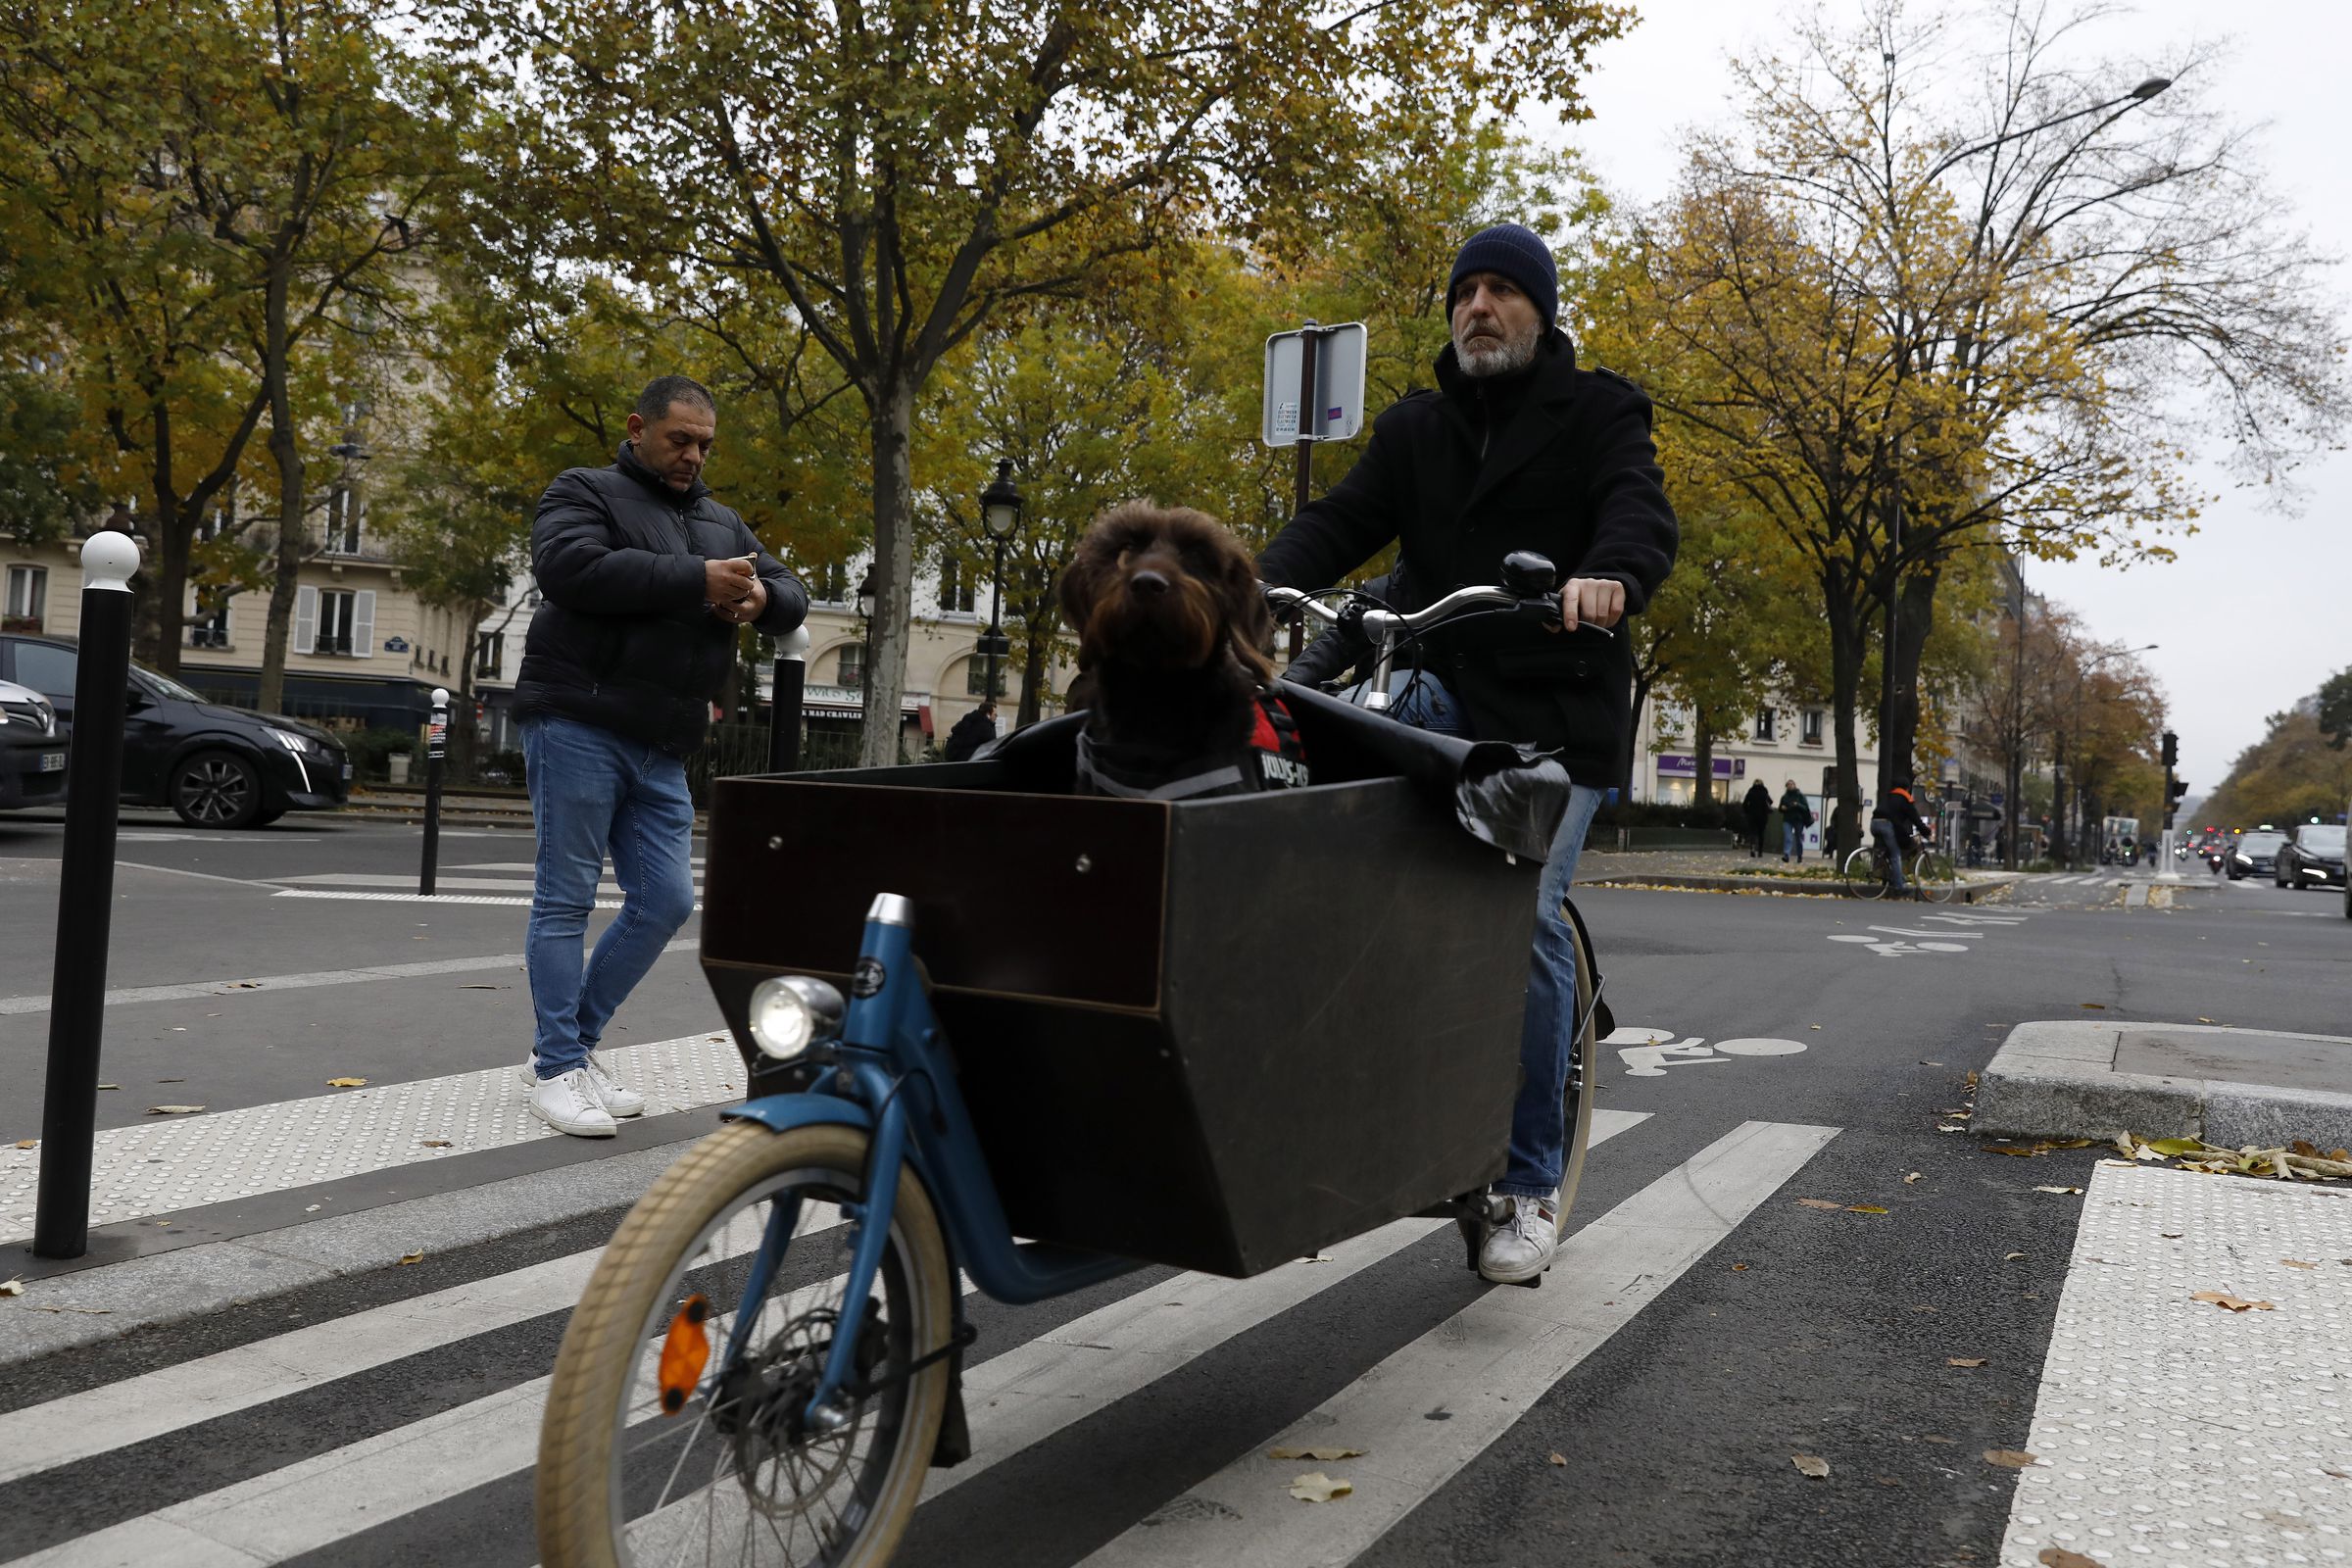 Paris Goes Green As Cycle Paths Expand In Urban Sustainability Bid